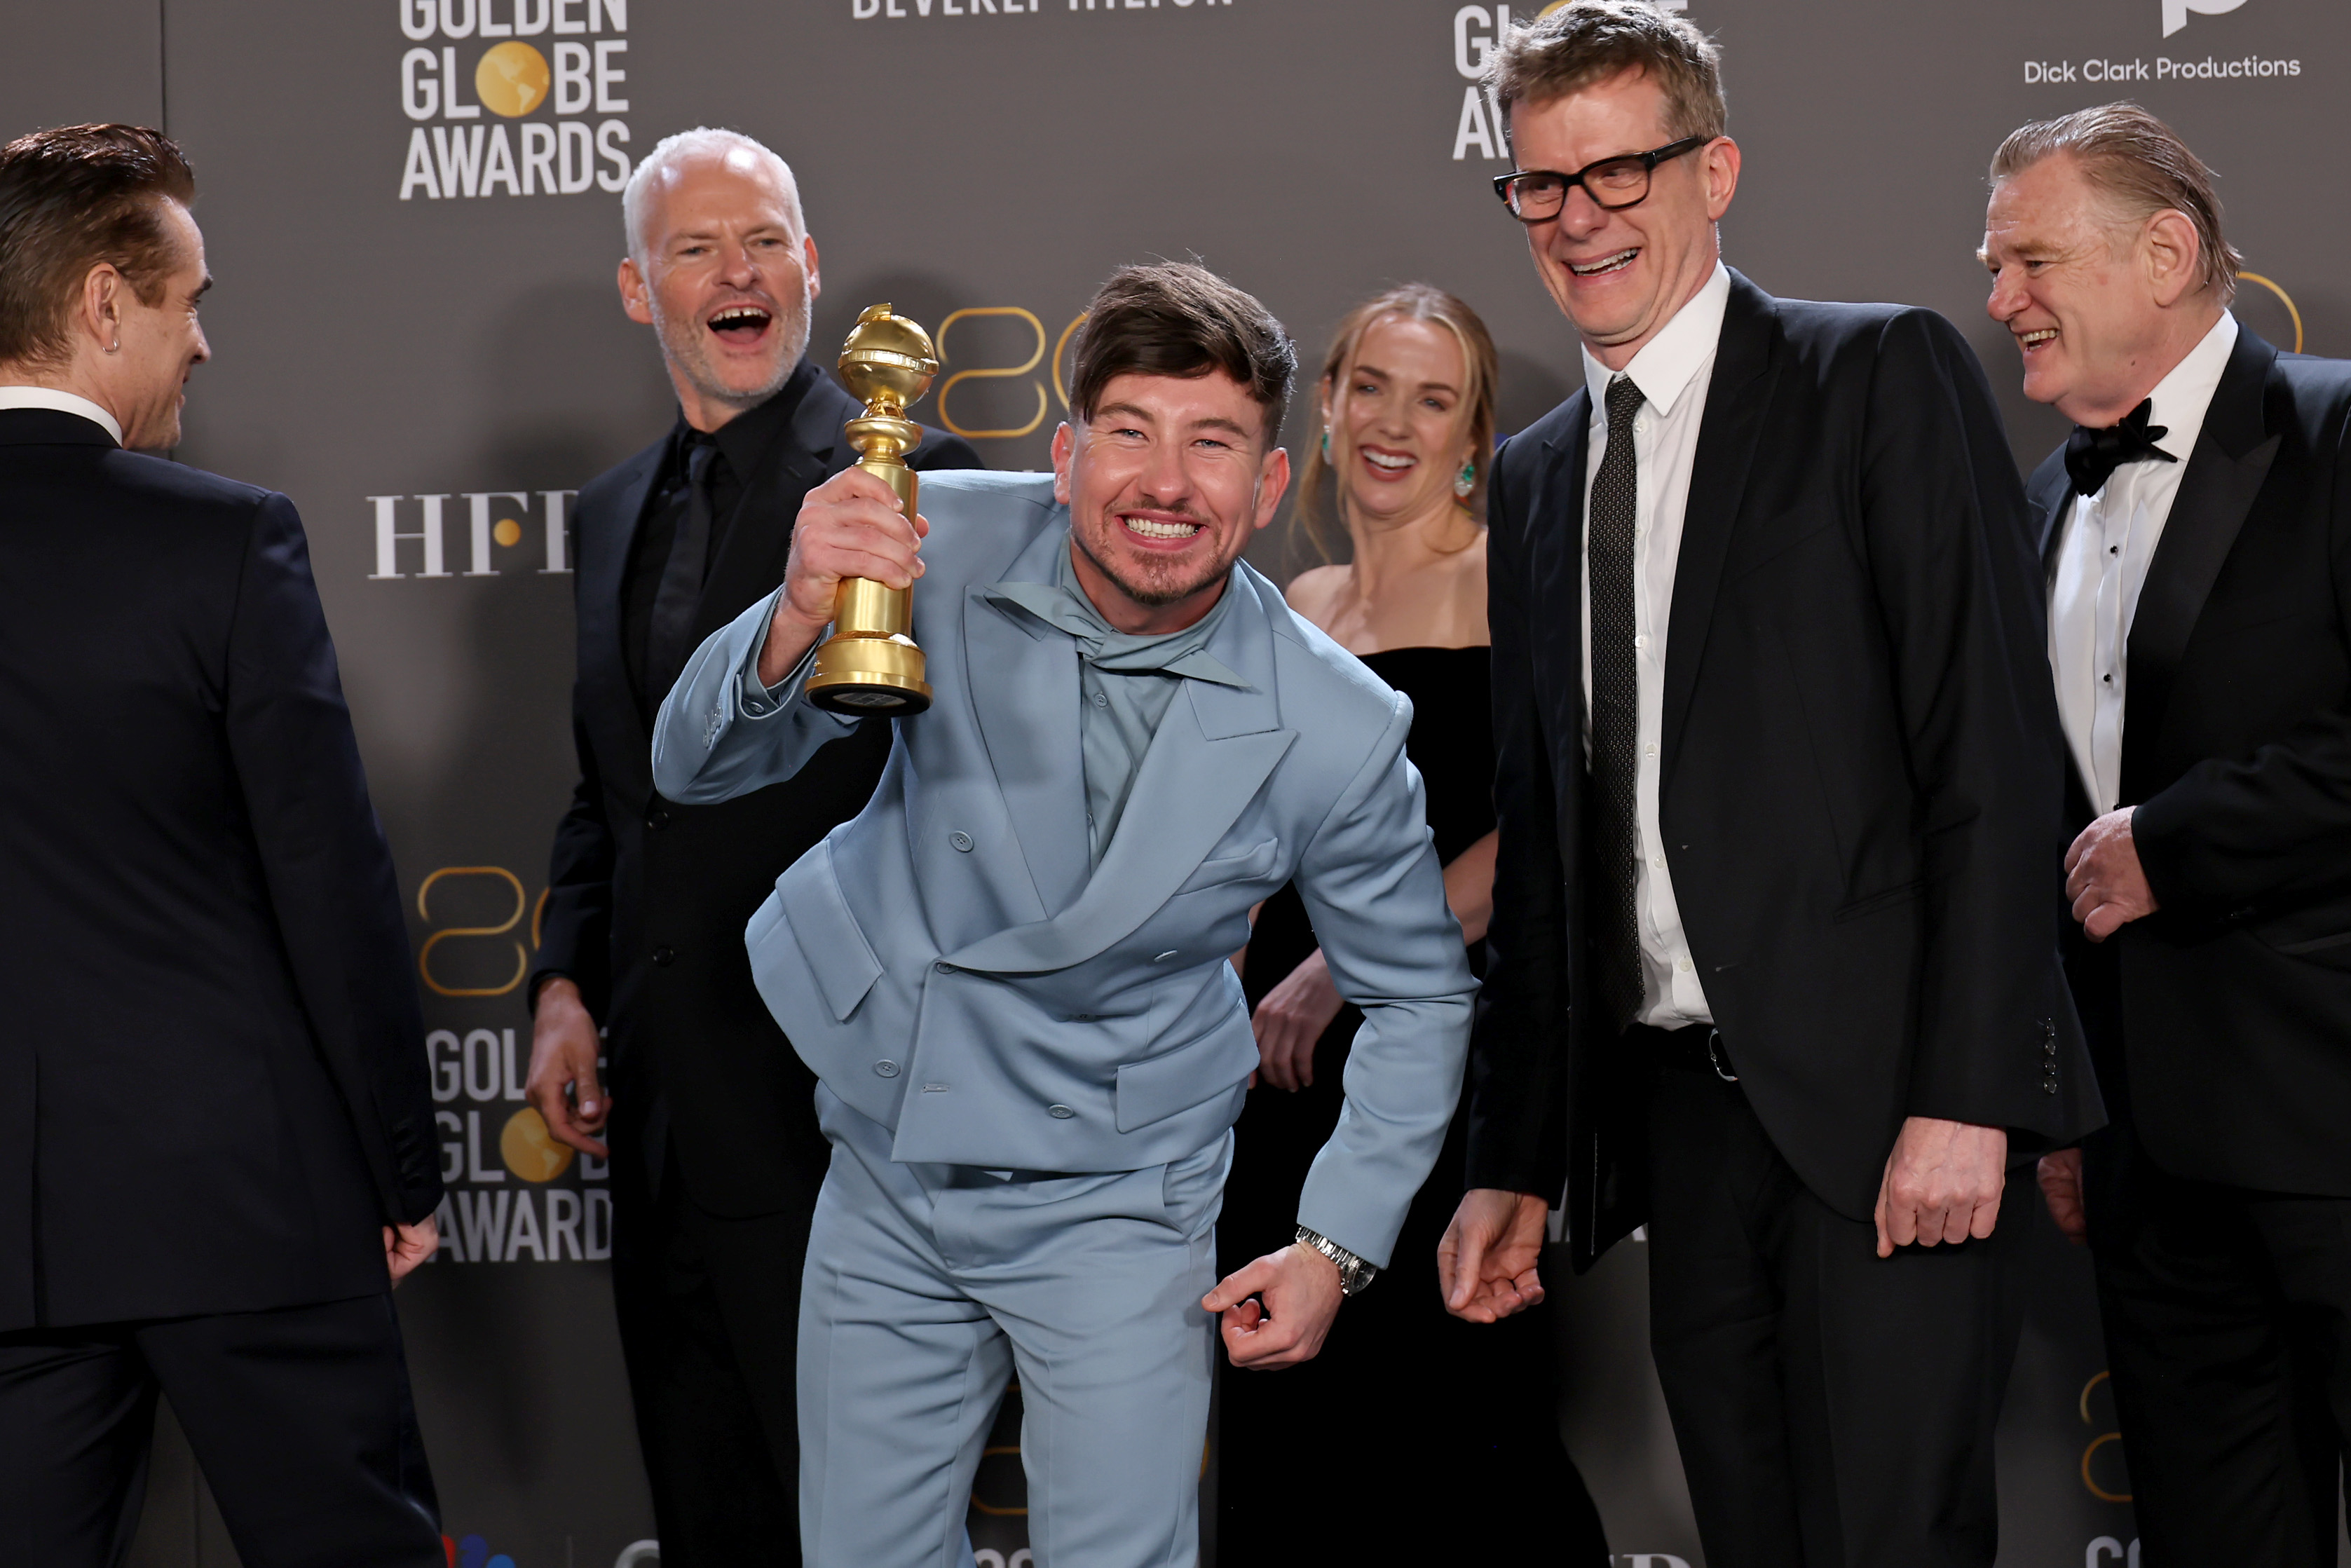 barry leaning into the camera and grinning wide with his award